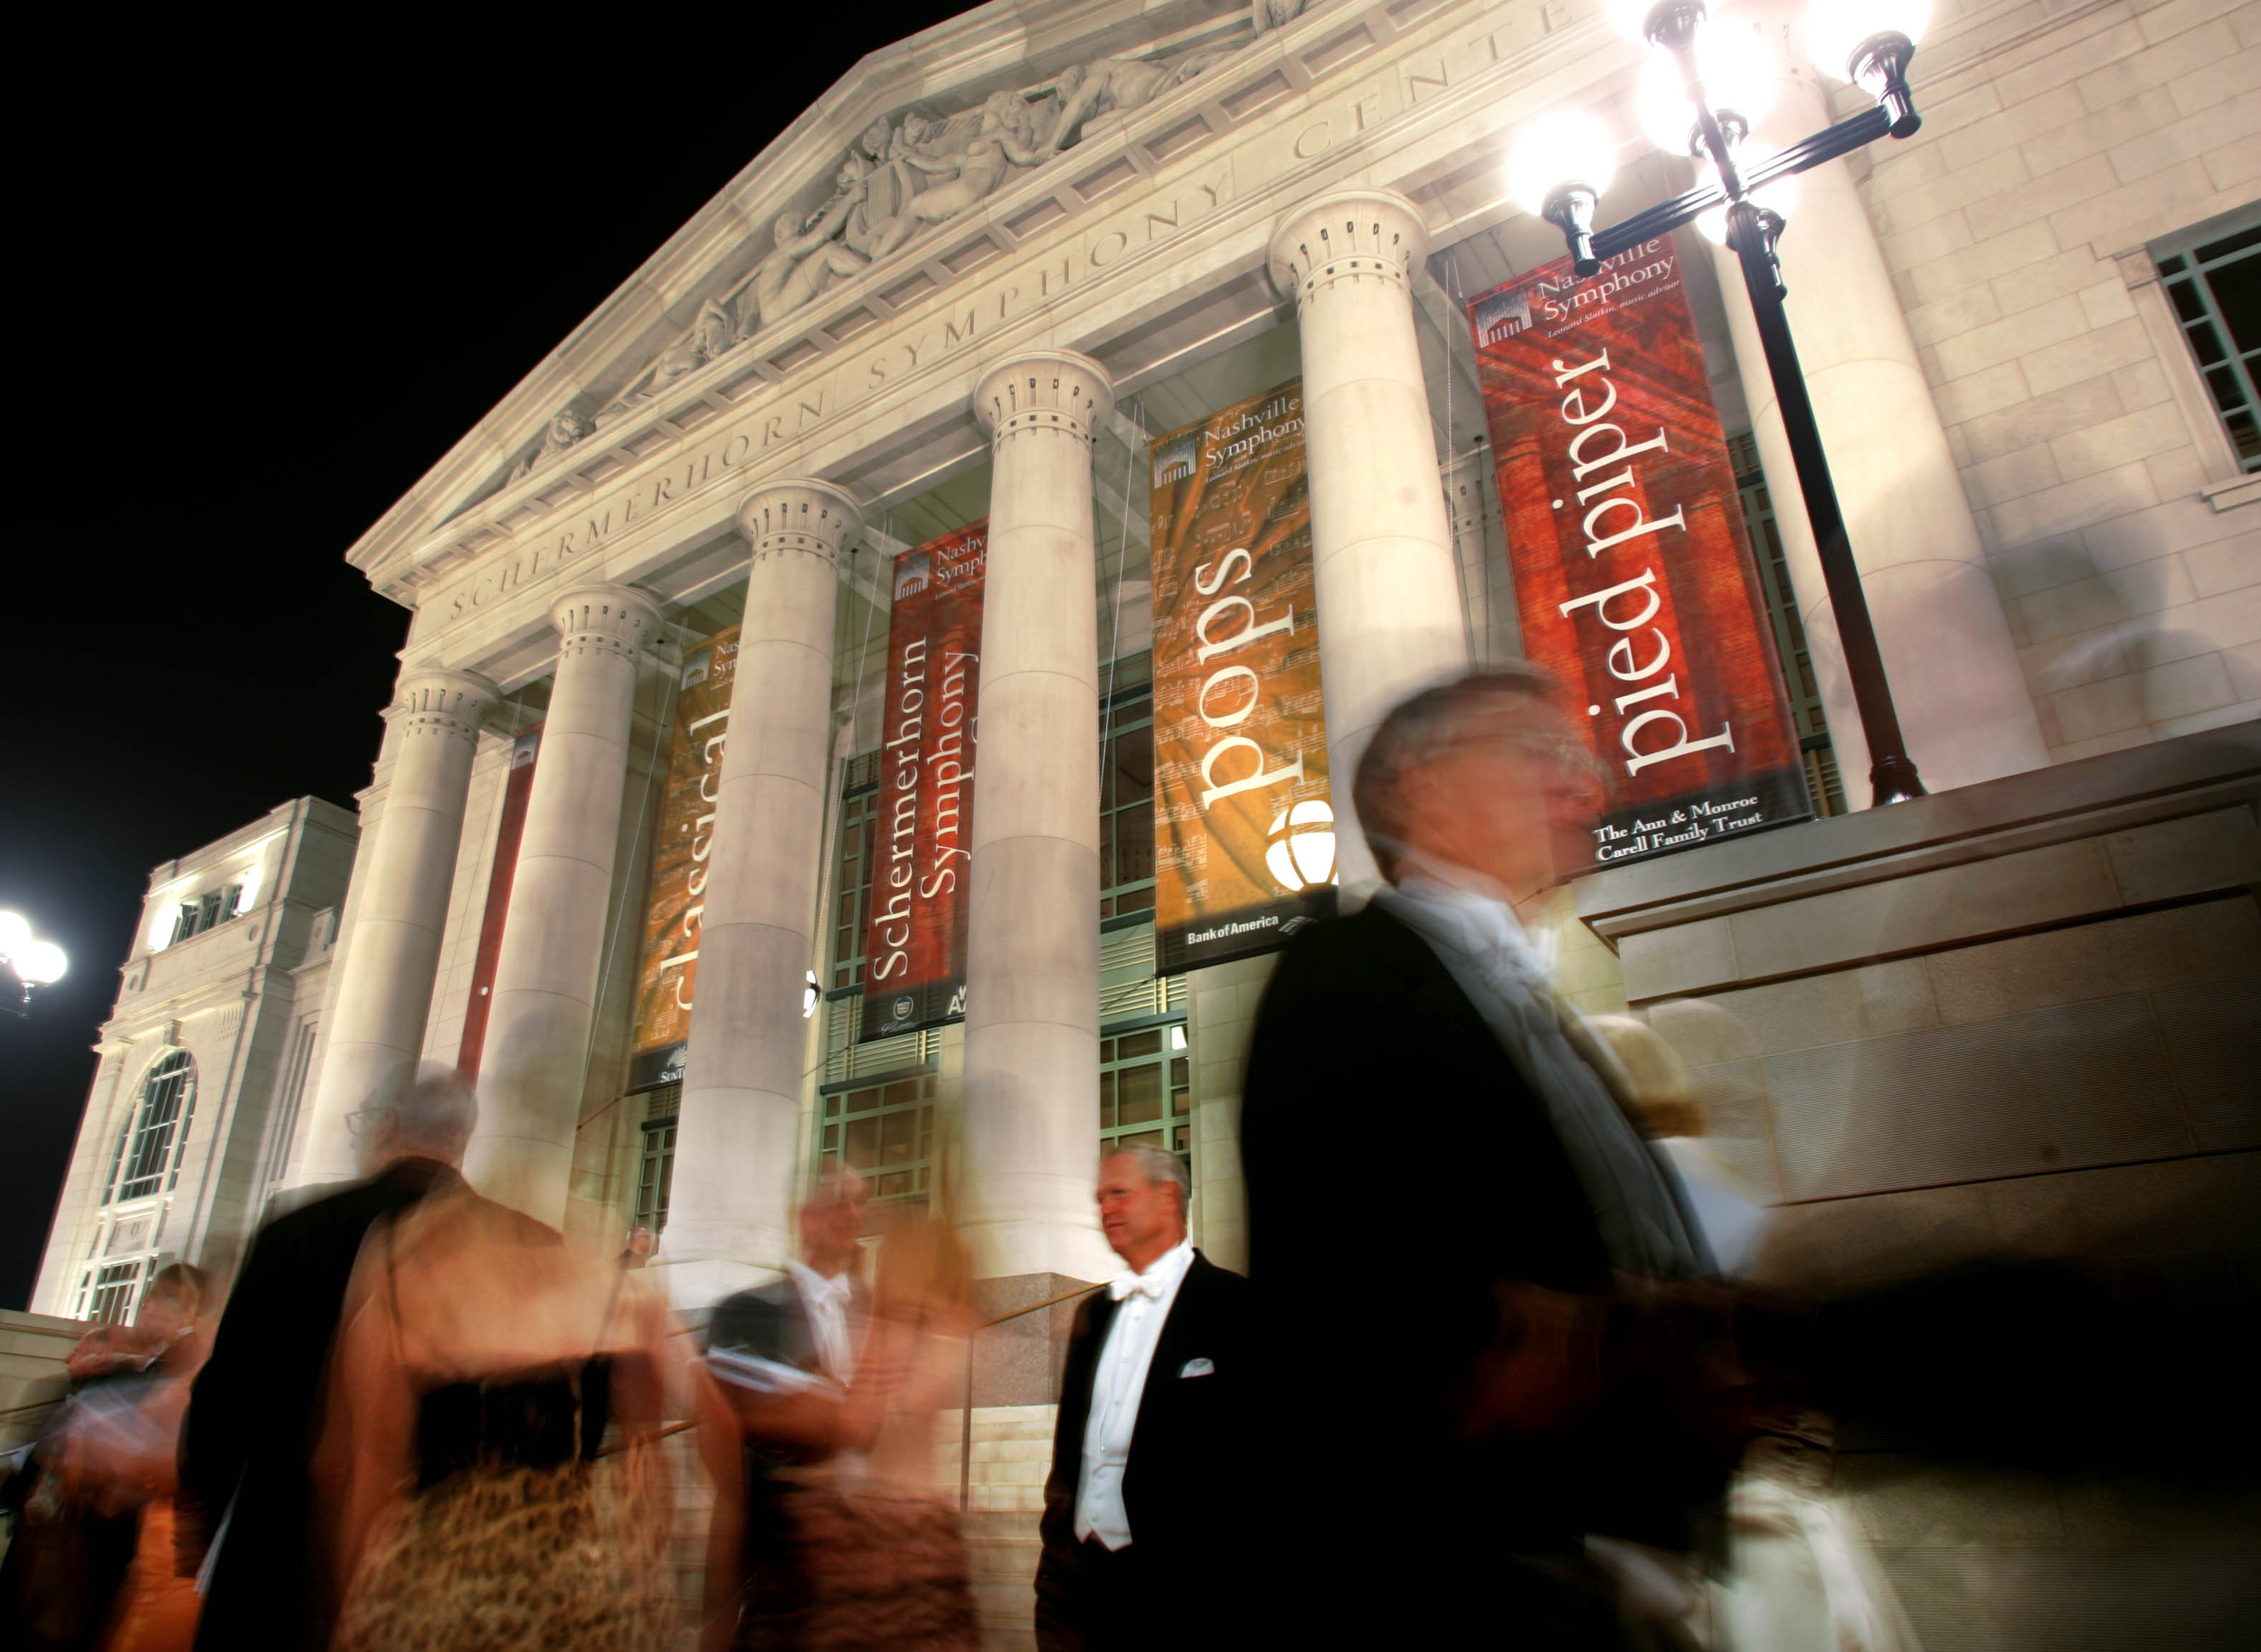  Symphony-goers stand outside the Symphony Center in the evening during the black-tie opening gala Saturday, September 9, 2006 in Nashville, Tenn.  